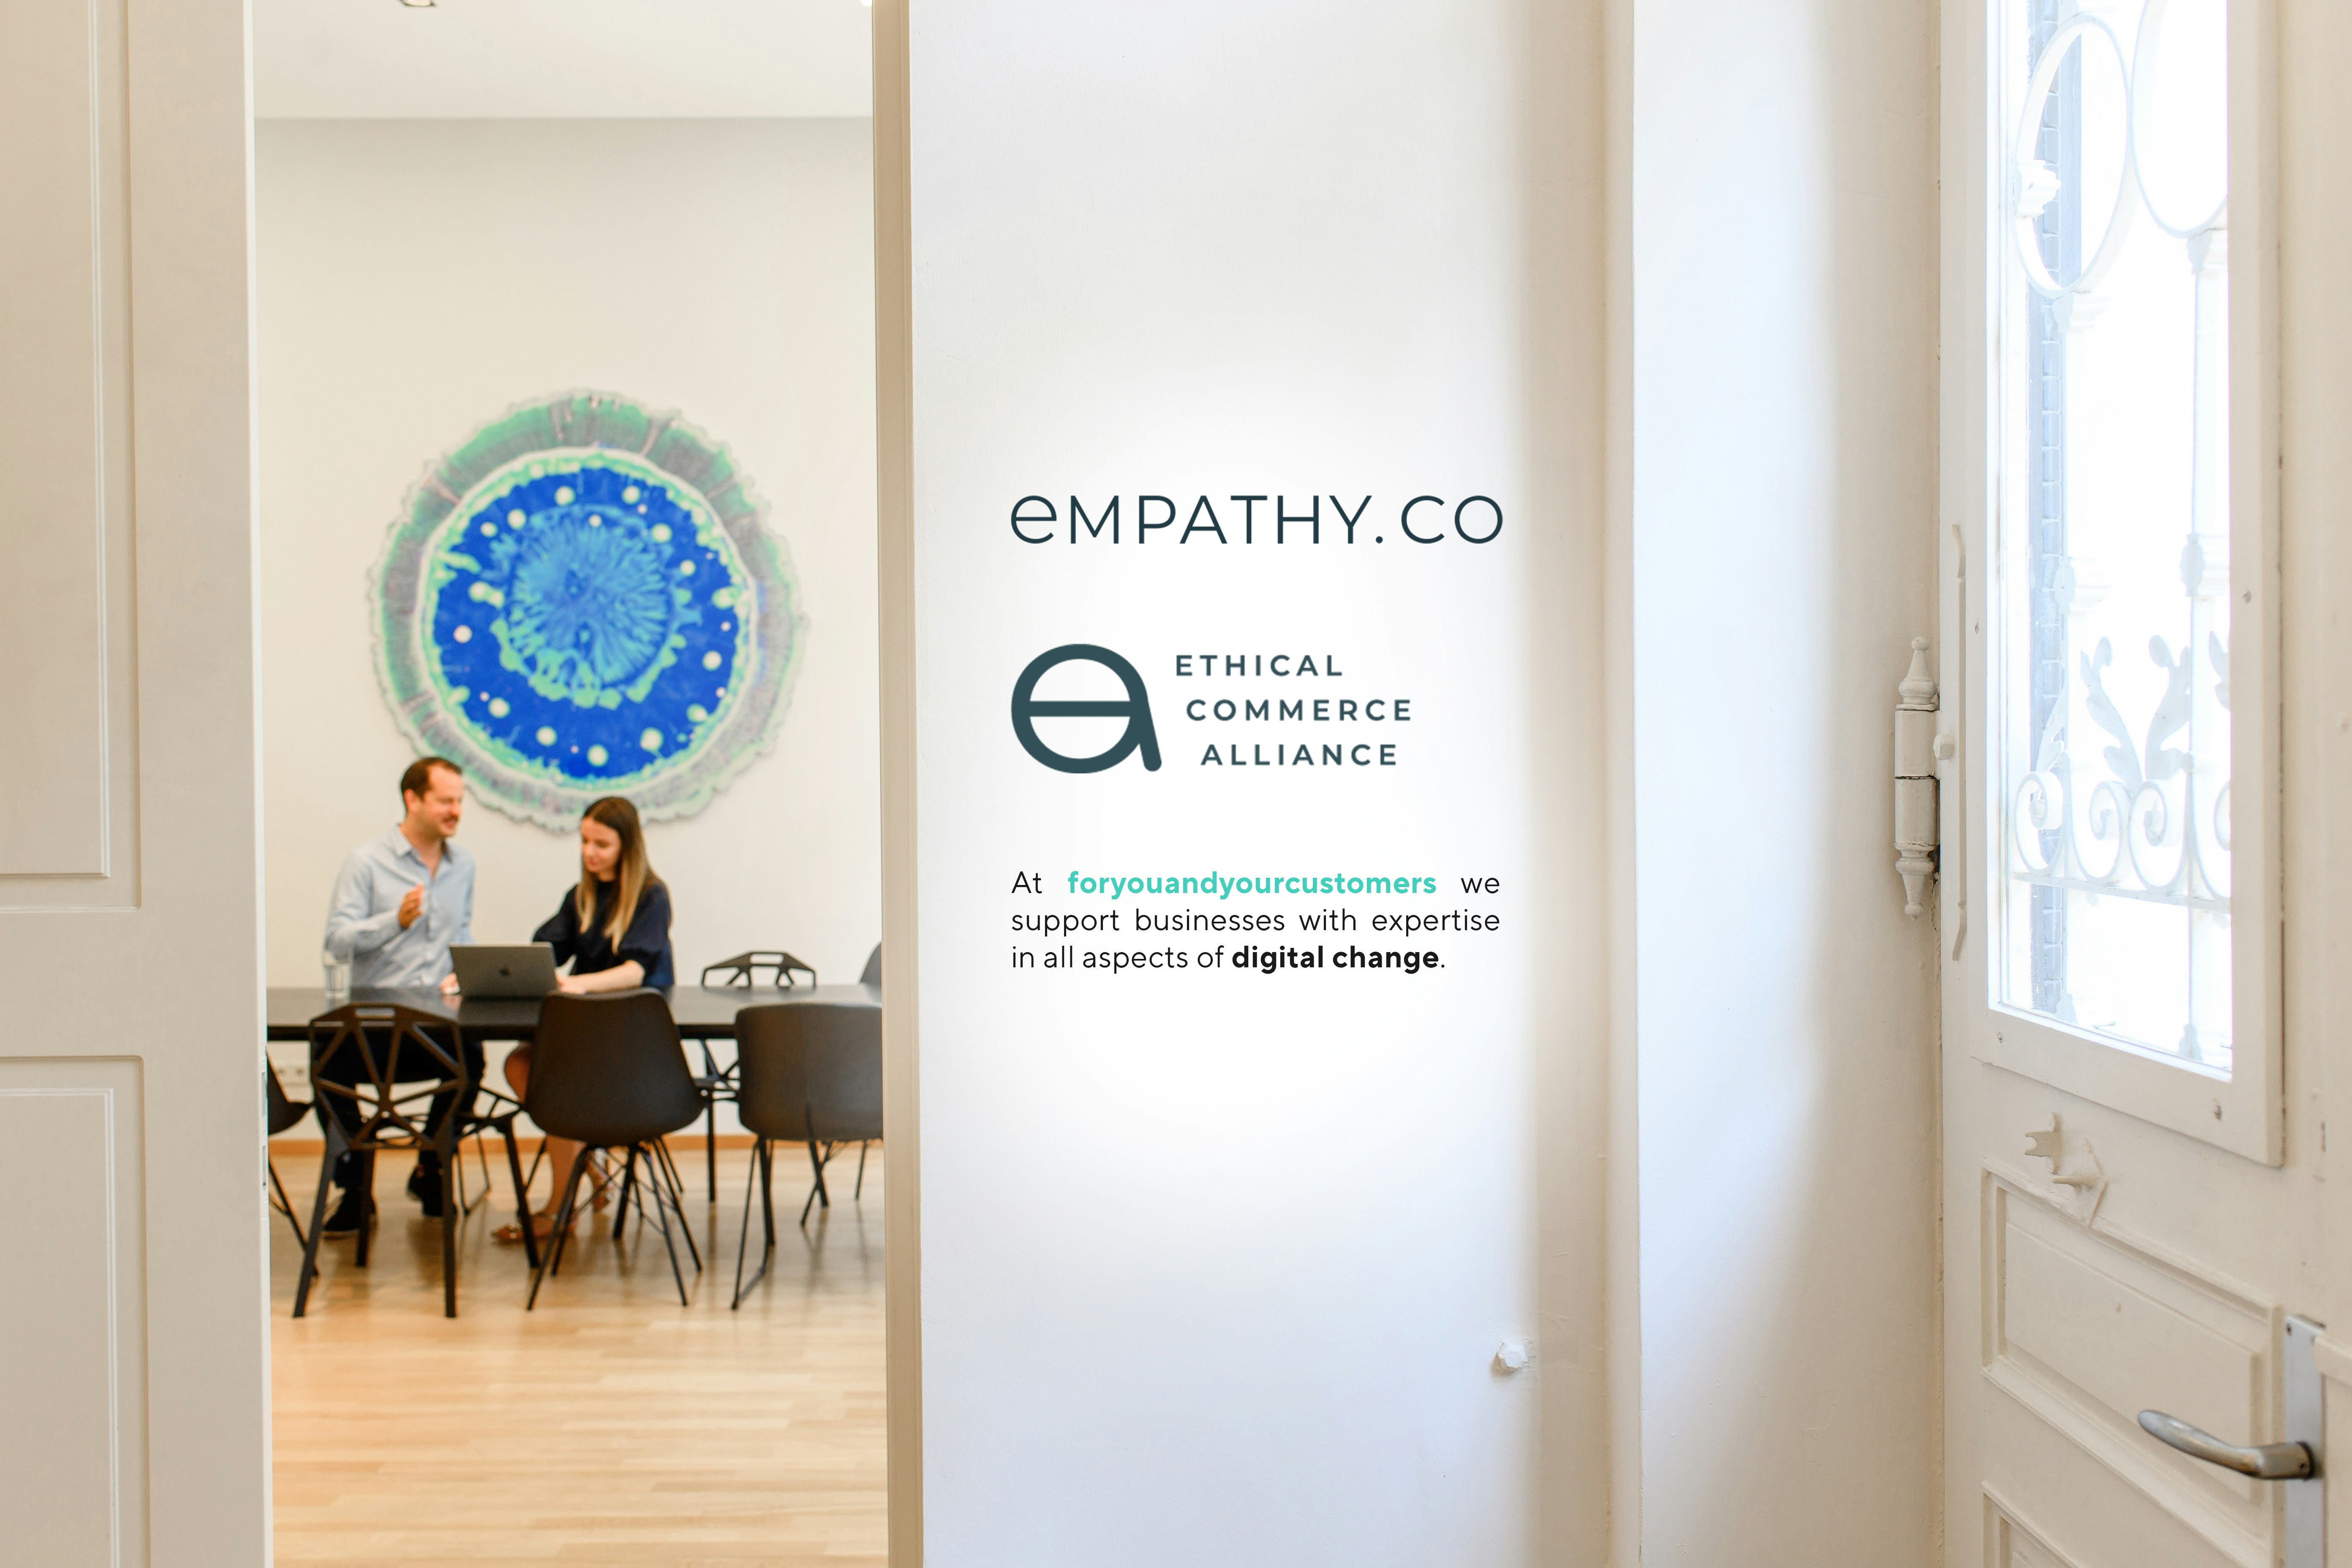 Mapping the Future of Retail Event with Empathy.co and Ethical Commerce Alliance